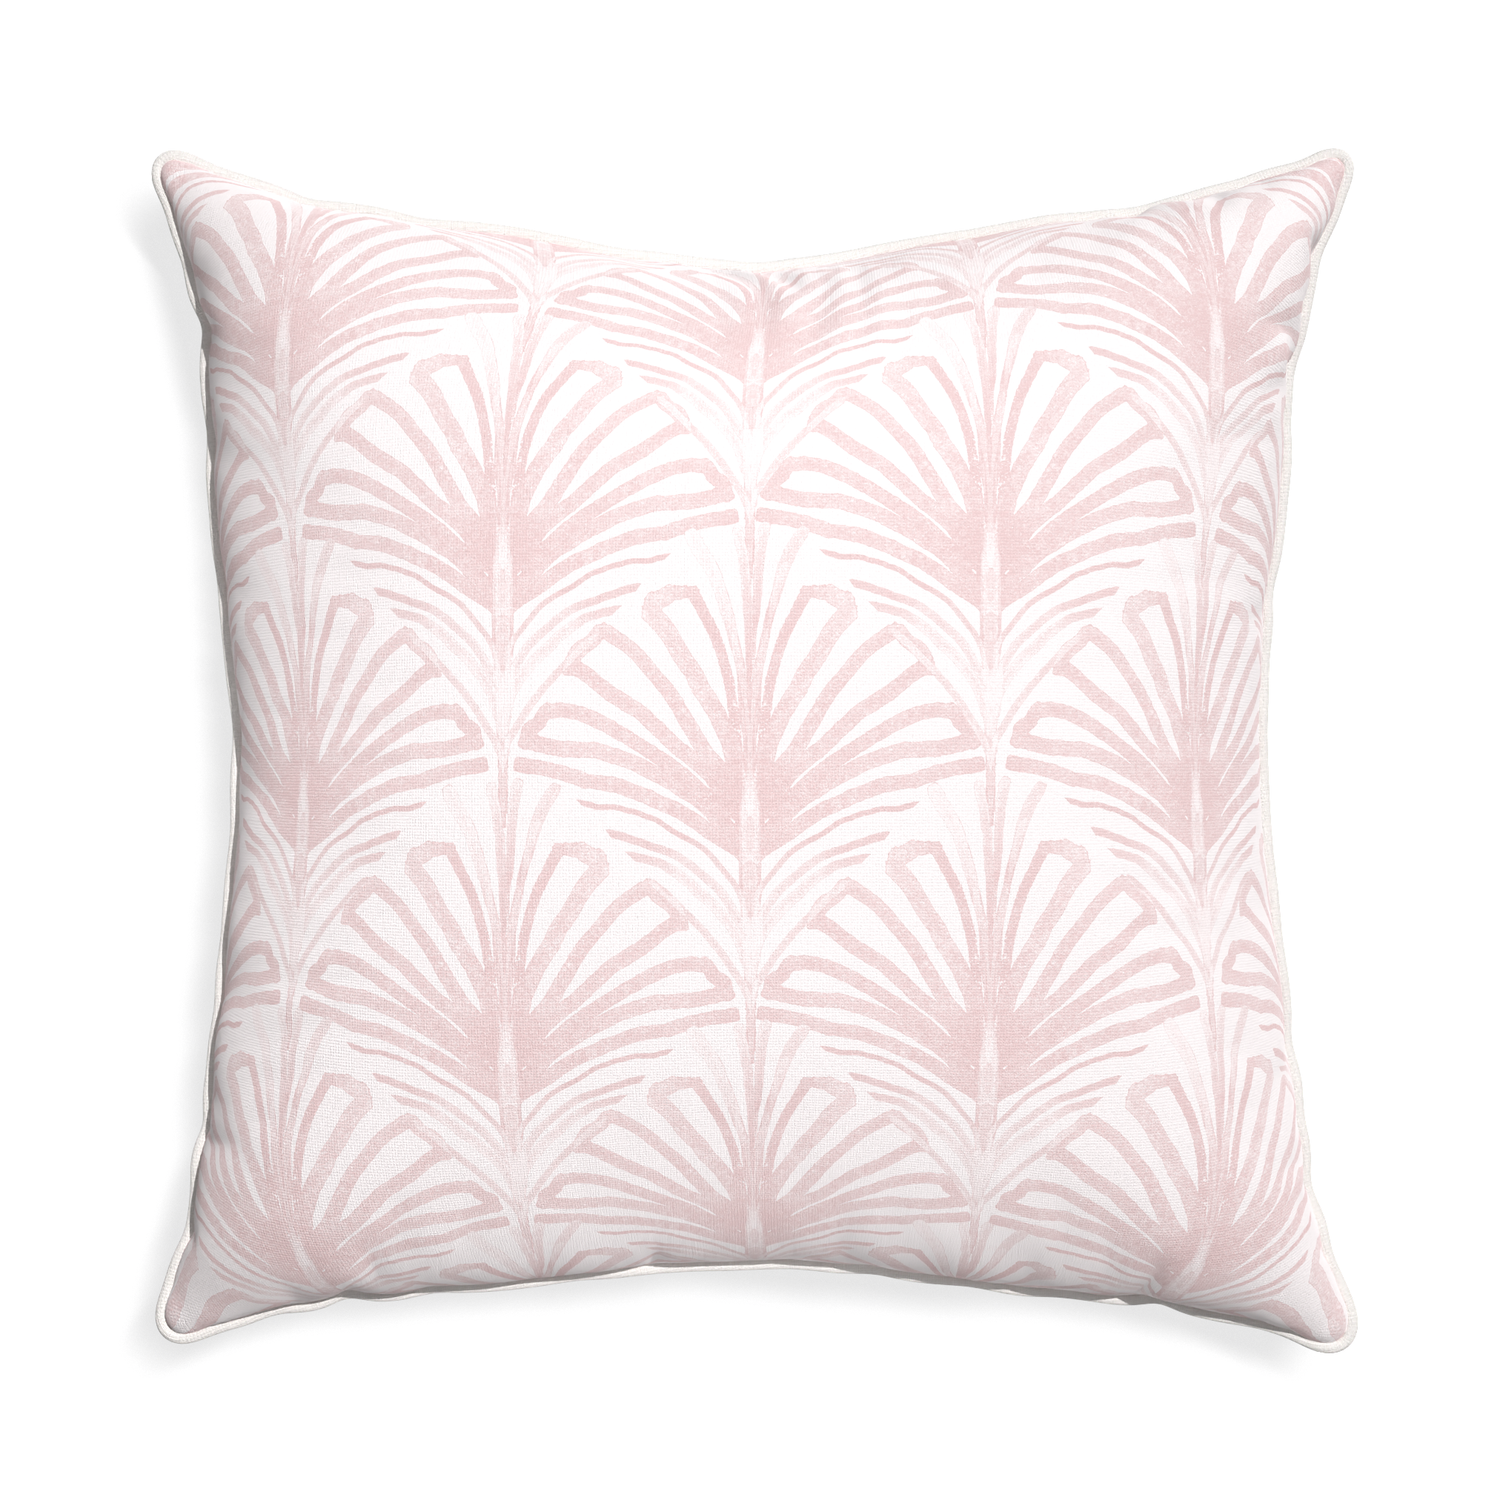 Euro-sham suzy rose custom pillow with snow piping on white background